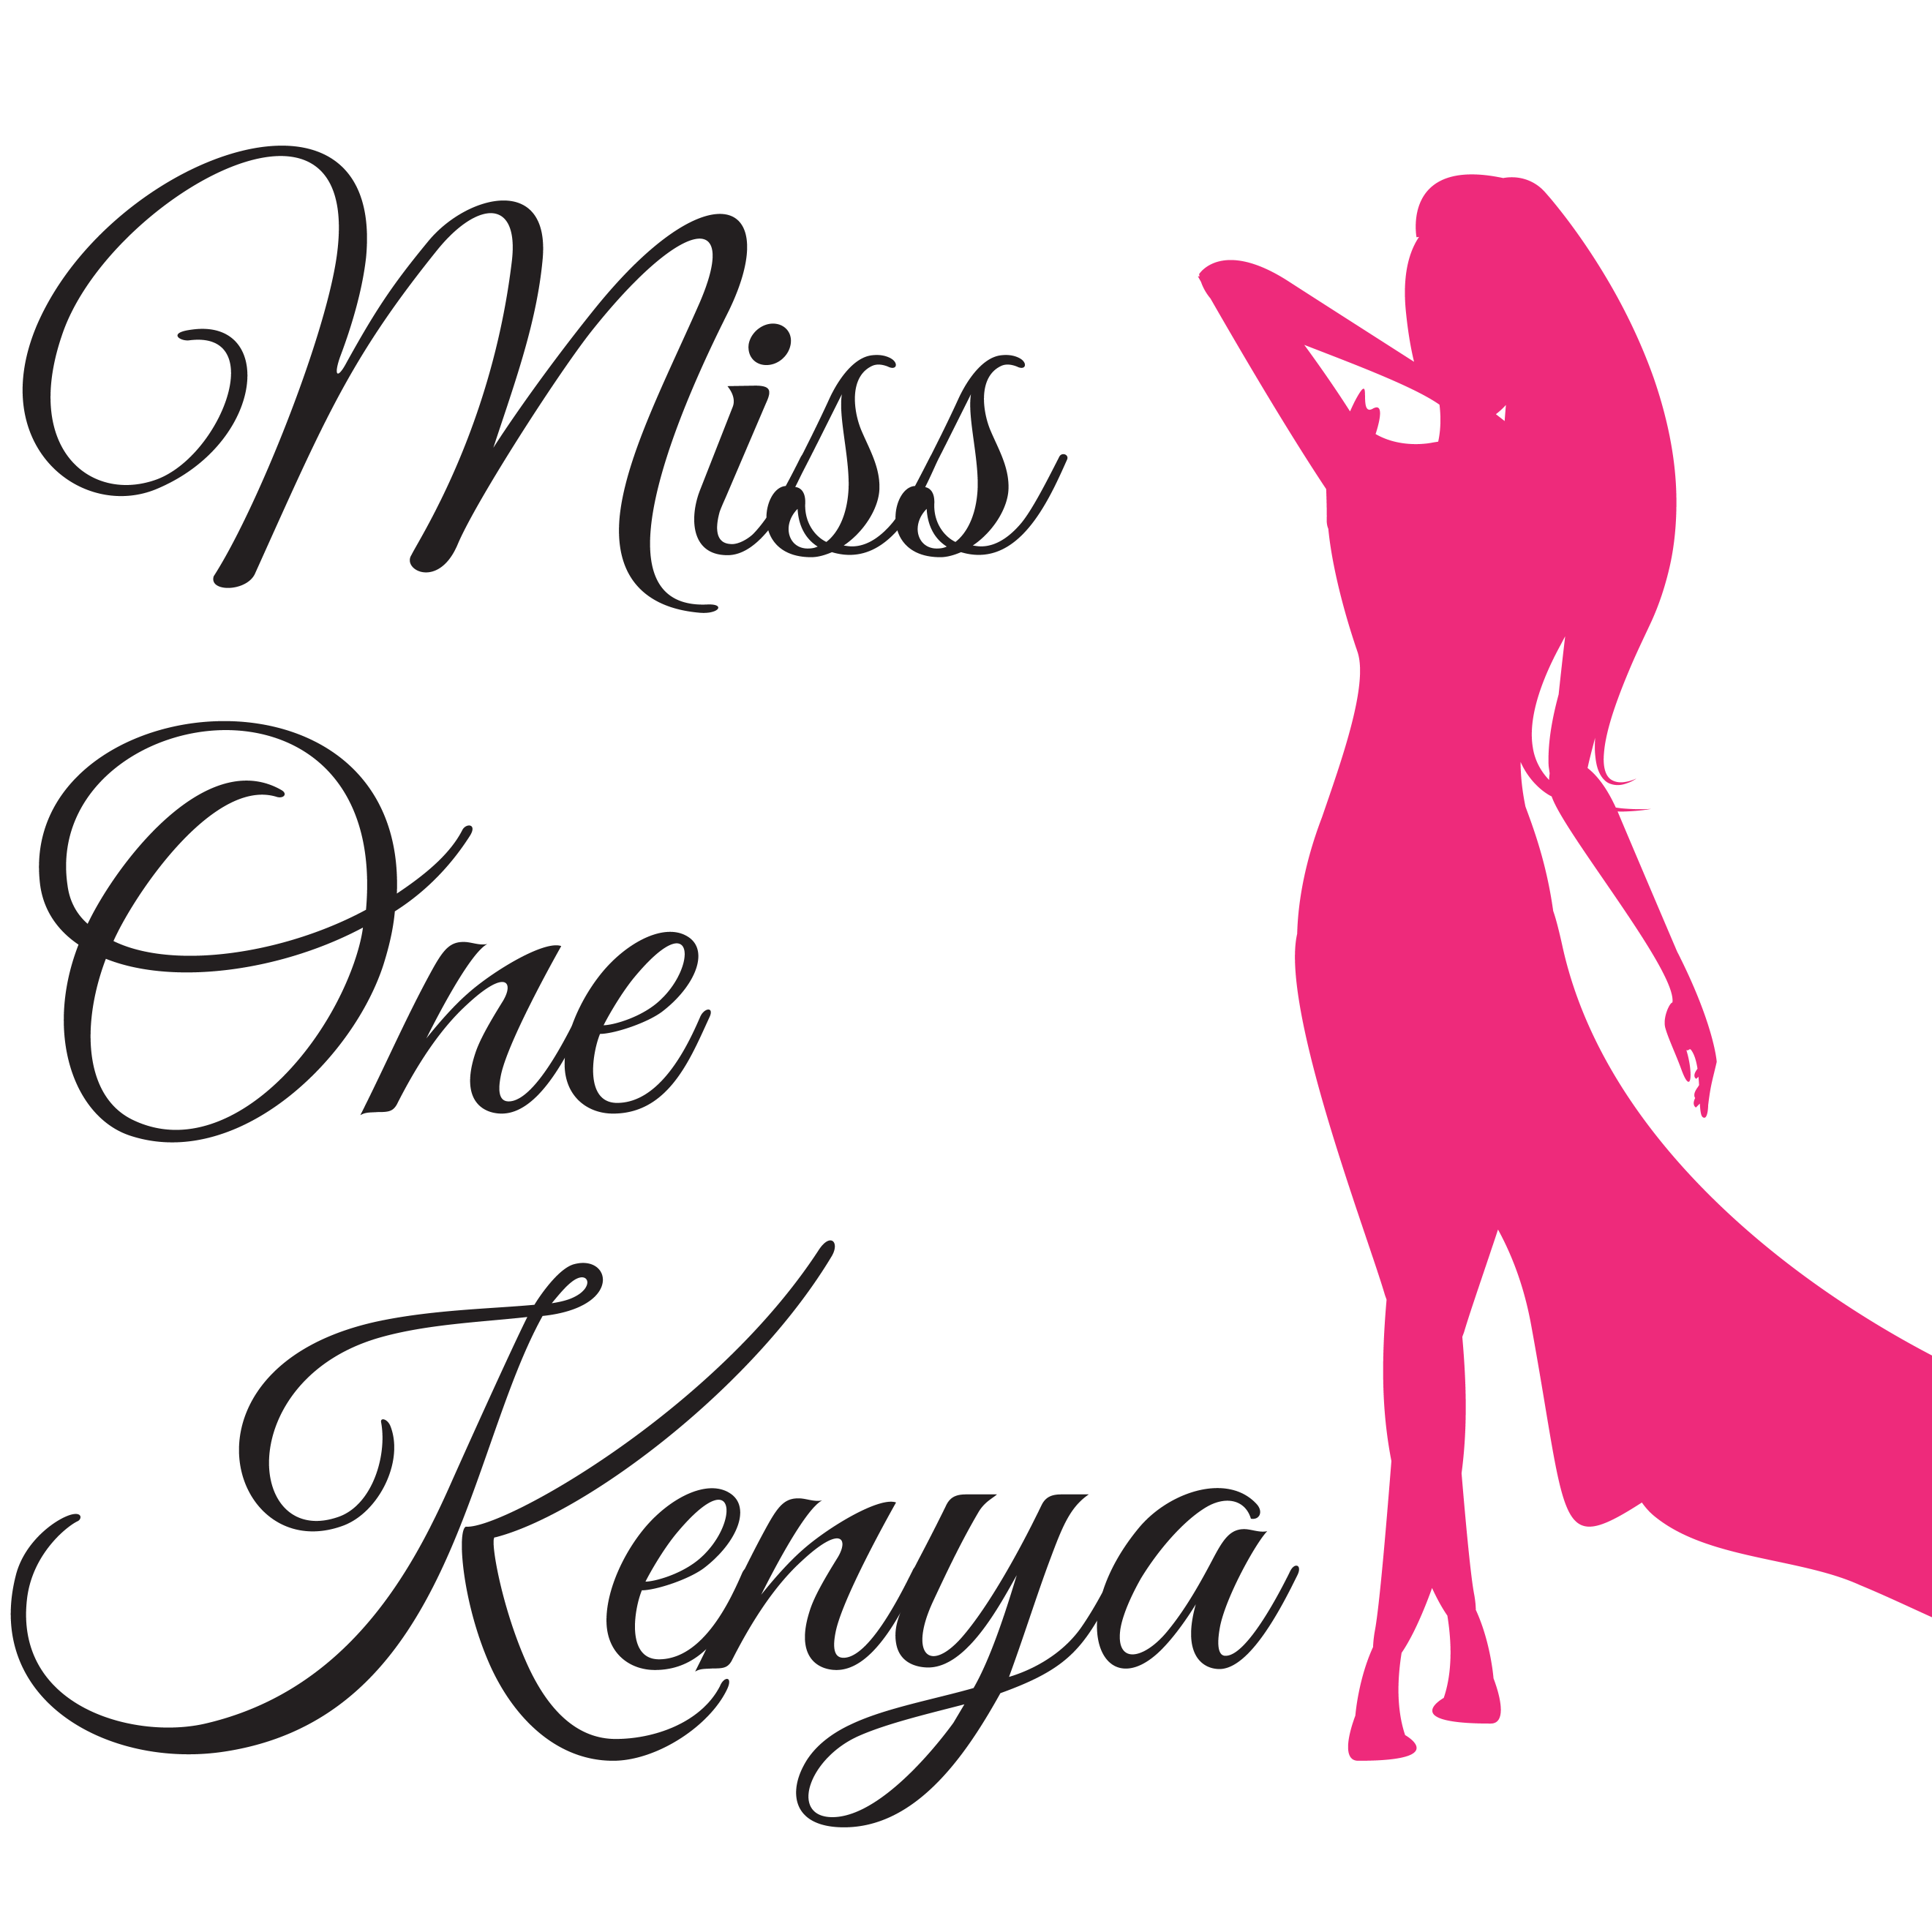 From 290 Constituencies to Miss One Kenya. It is a pageant that showcases the Beauty of Art, Tech Innovation, Start-ups Mentor-ship, and Entrepreneurship.